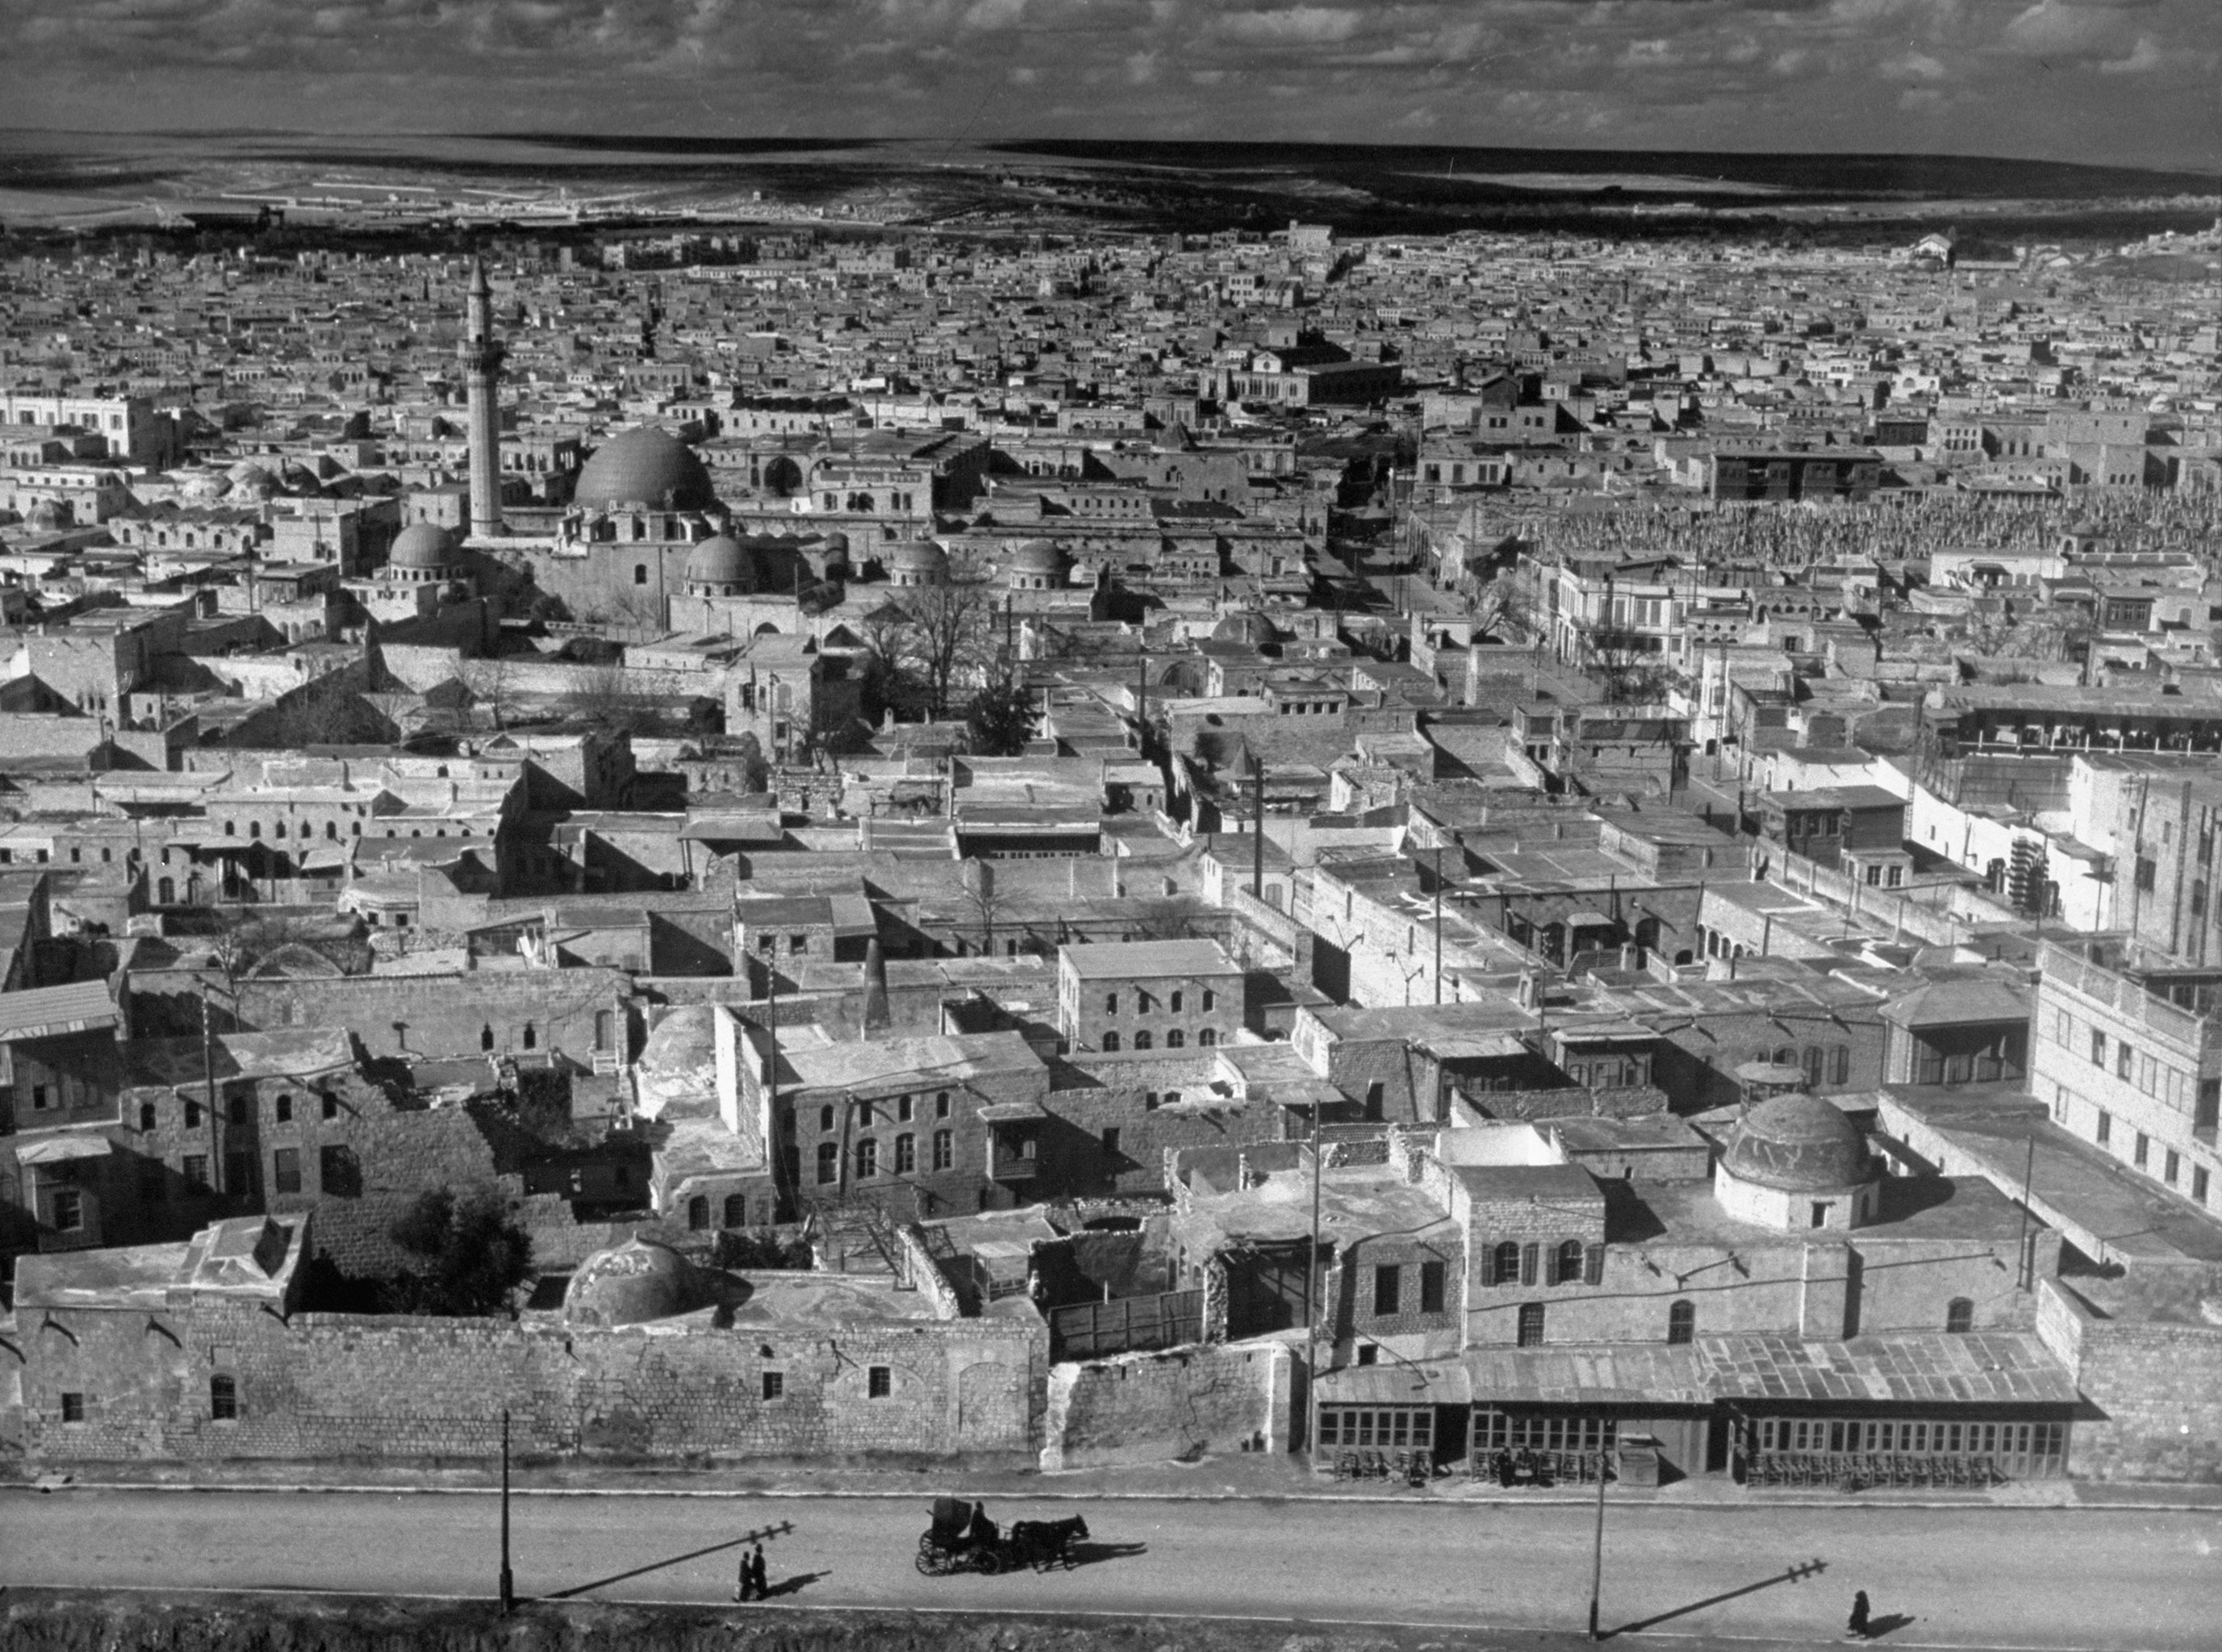 View from above Aleppo, Syria, 1940.